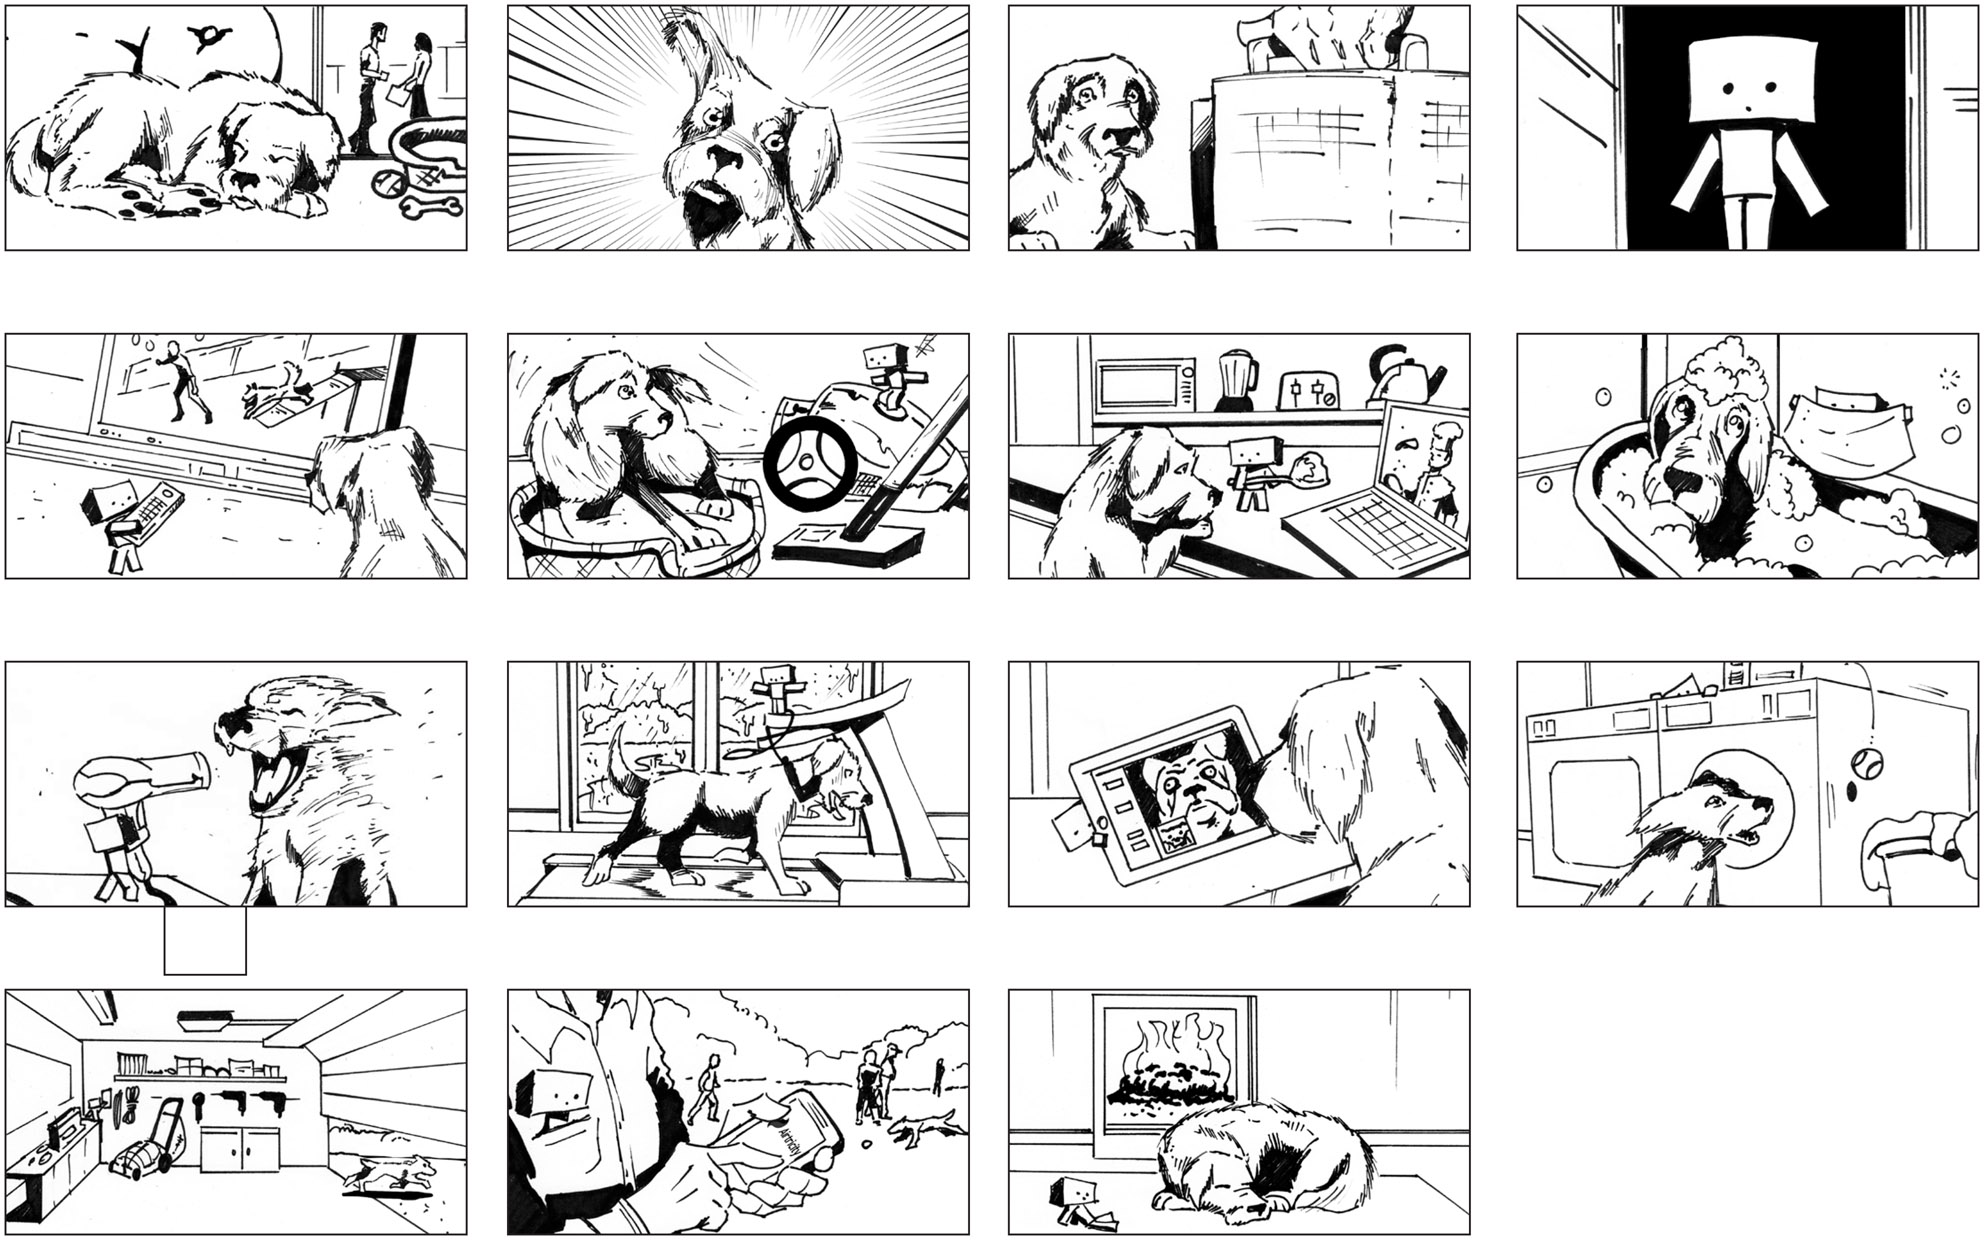 Puppet title: create a storyboard for your video author 